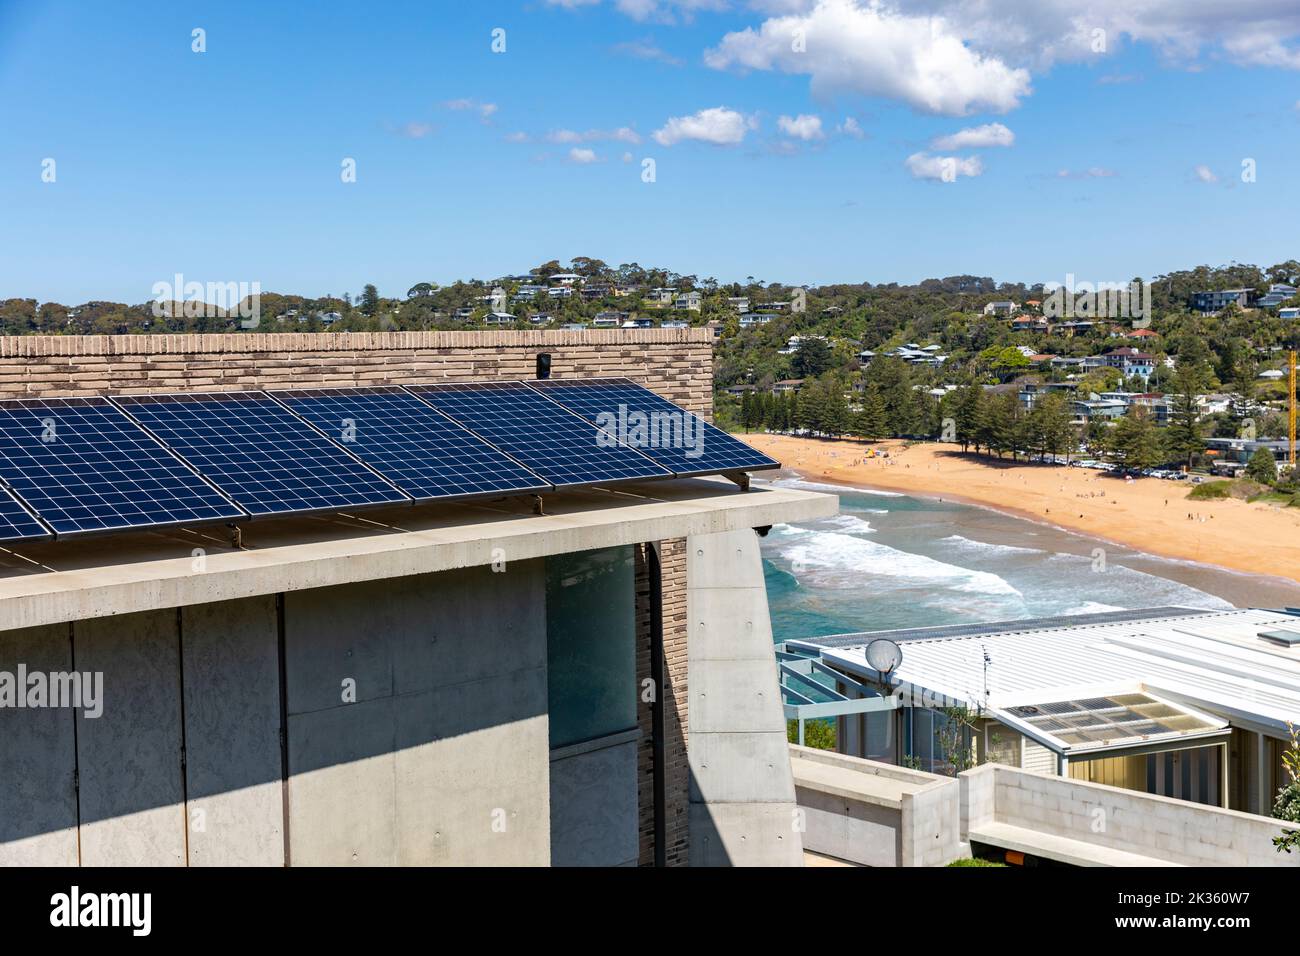 Solar panels PV fitted to a luxury beach house in Whale Beach suburb of Sydney,NSW,Australia, with views of the ocean and beach Stock Photo